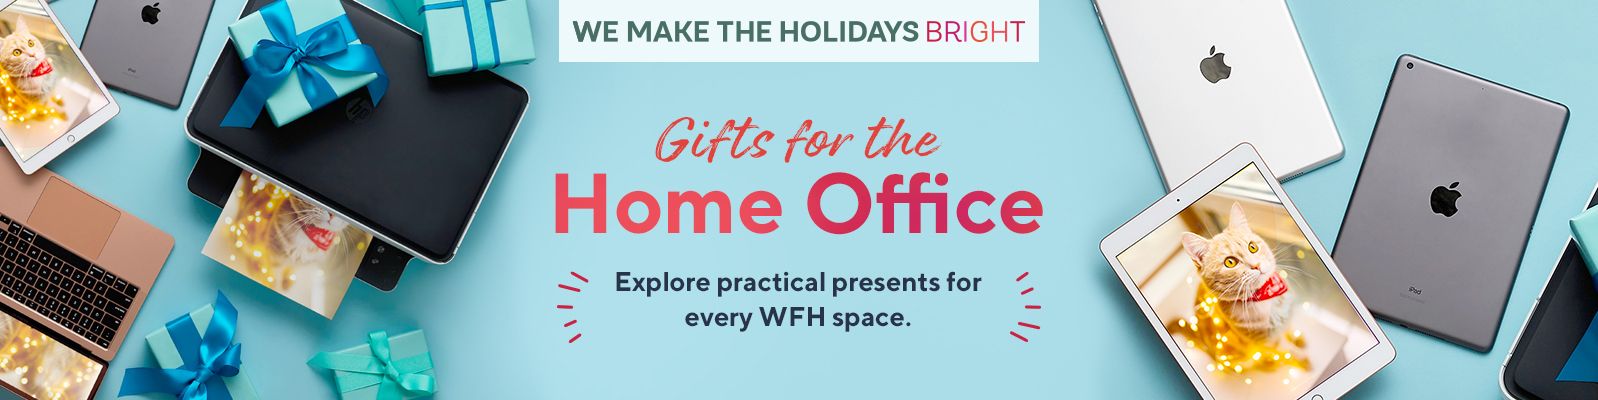 We Make the Holidays Bright - Gifts for the Home Office - Explore practical presents for every WFH space. 